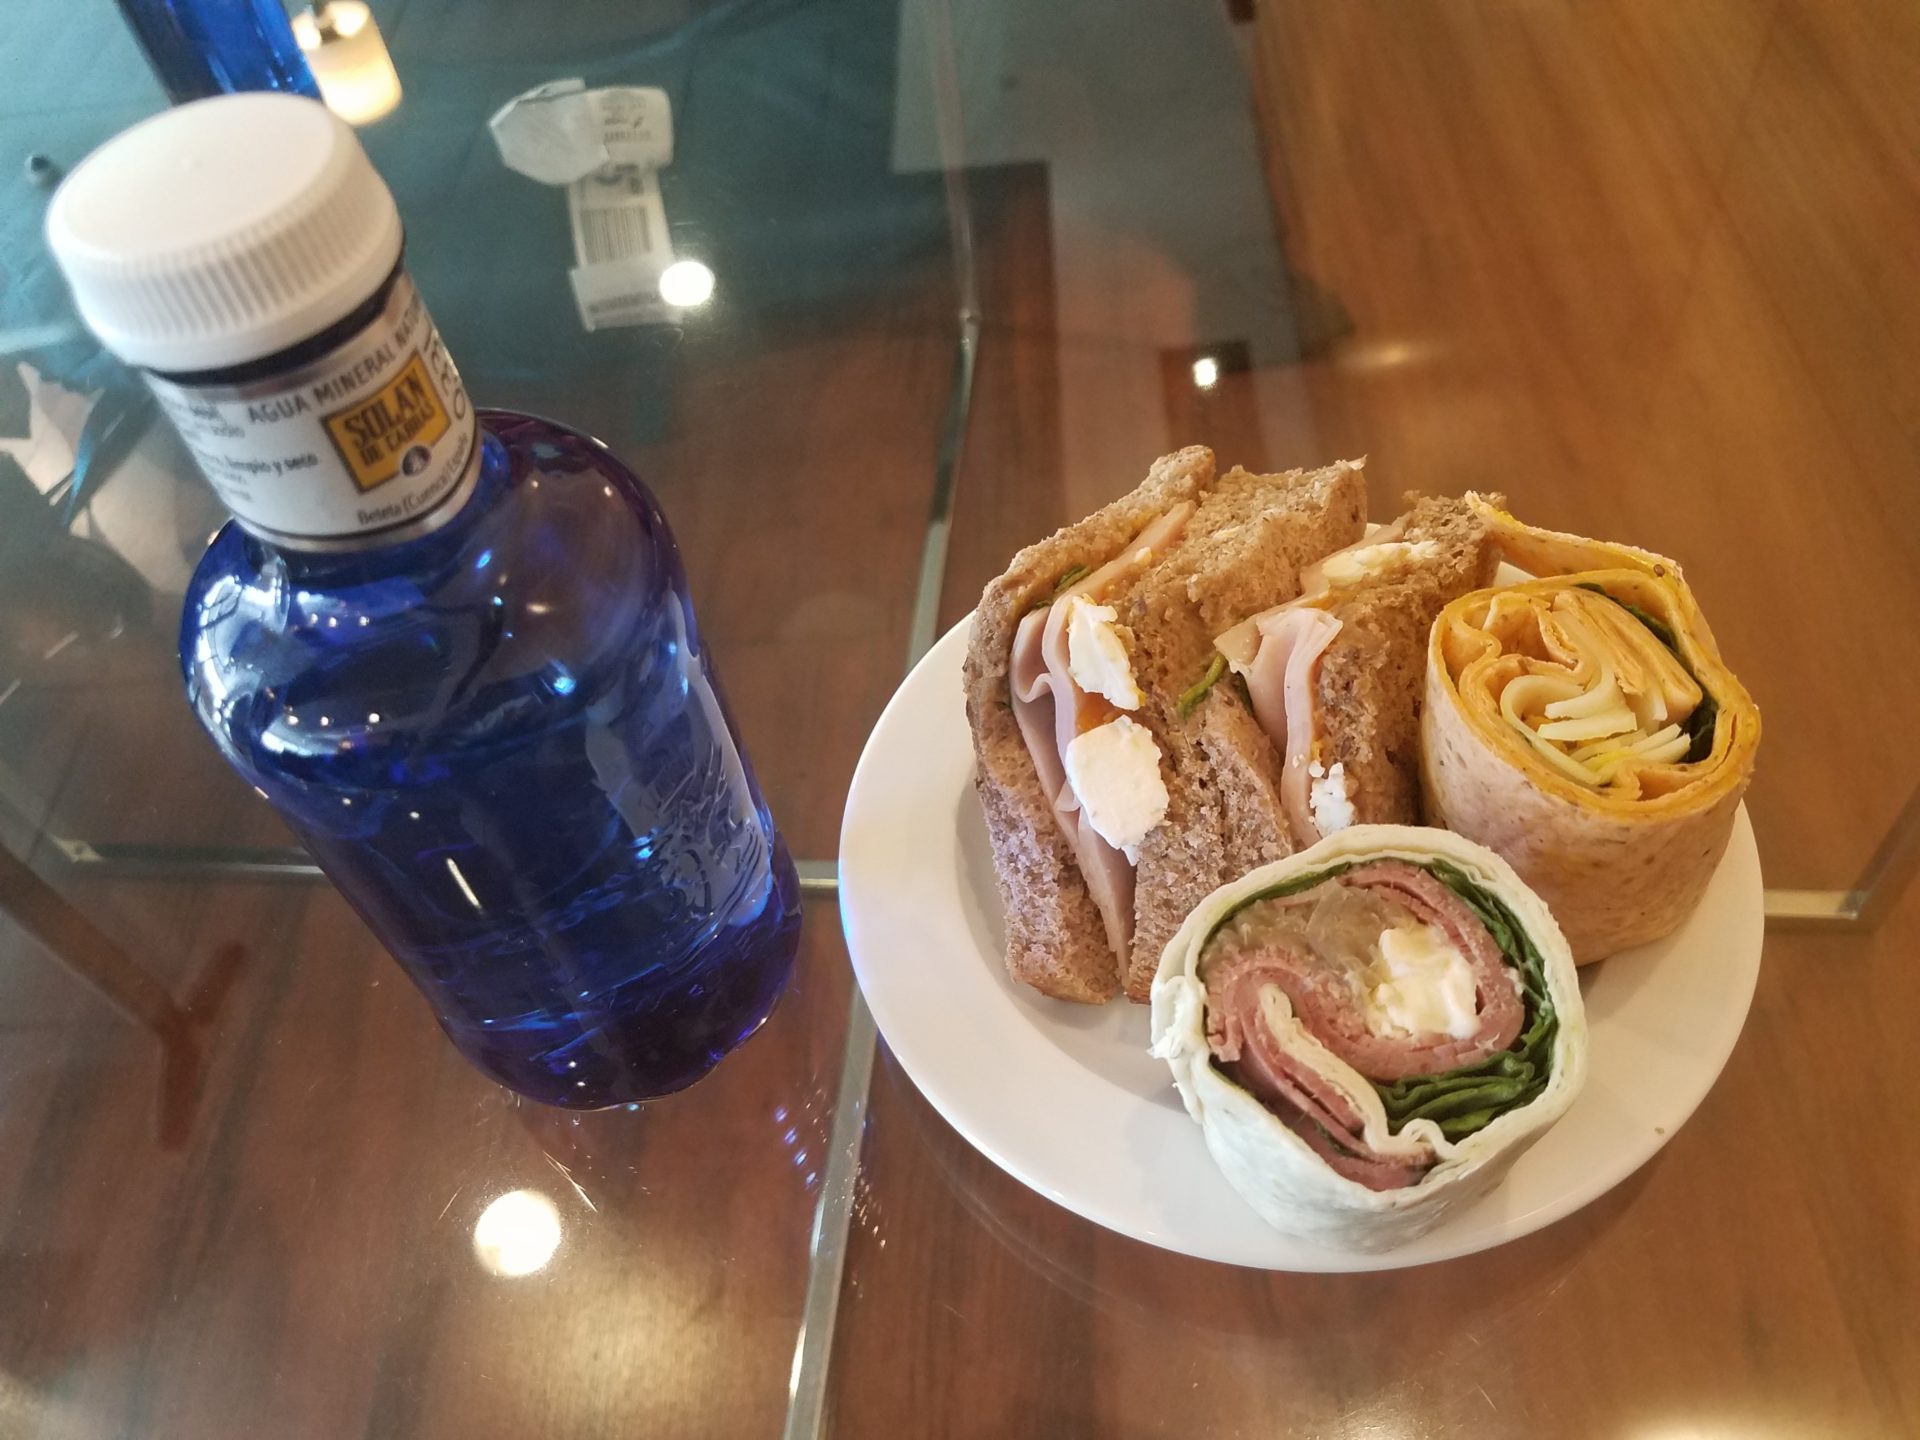 a plate of sandwiches and a bottle of water